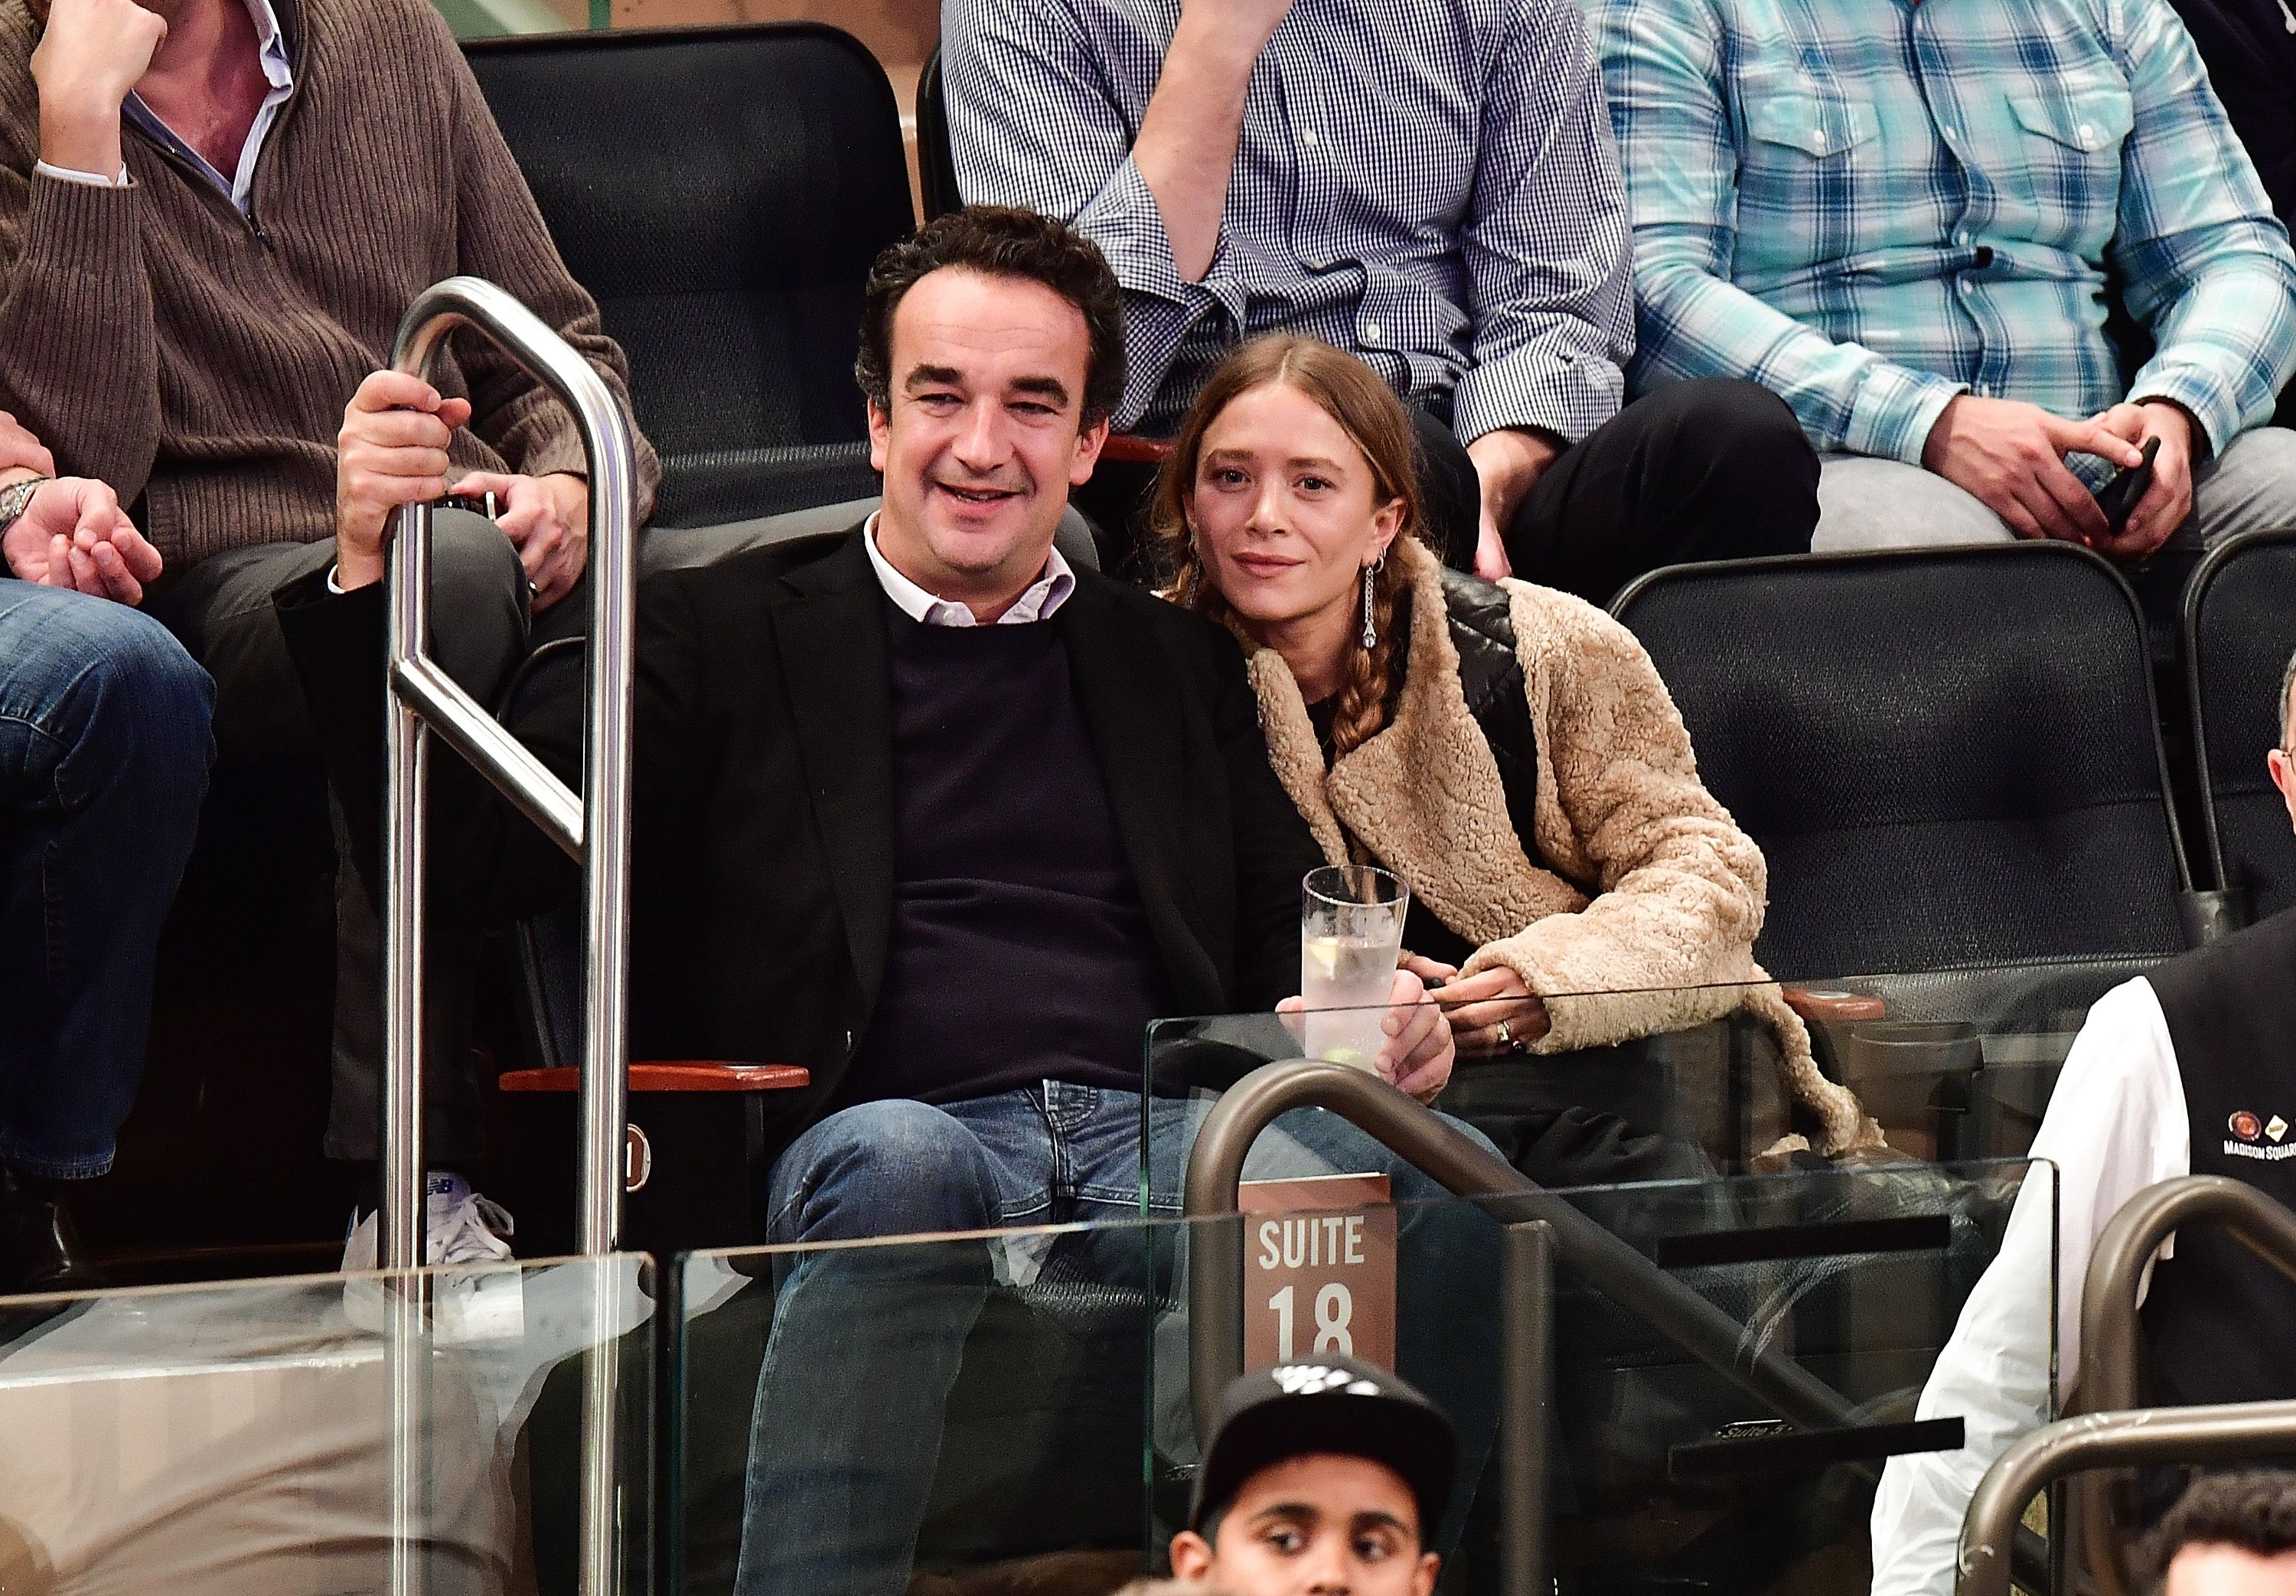 NEW YORK, NY - NOVEMBER 09: (EXCLUSIVE COVERAGE PREMIUM RATES APPLY) Olivier Sarkozy and Mary-Kate Olsen attend New York Knicks vs Brooklyn Nets game at Madison Square Garden on November 9, 2016 in New York City. (Photo by James Devaney/GC Images)